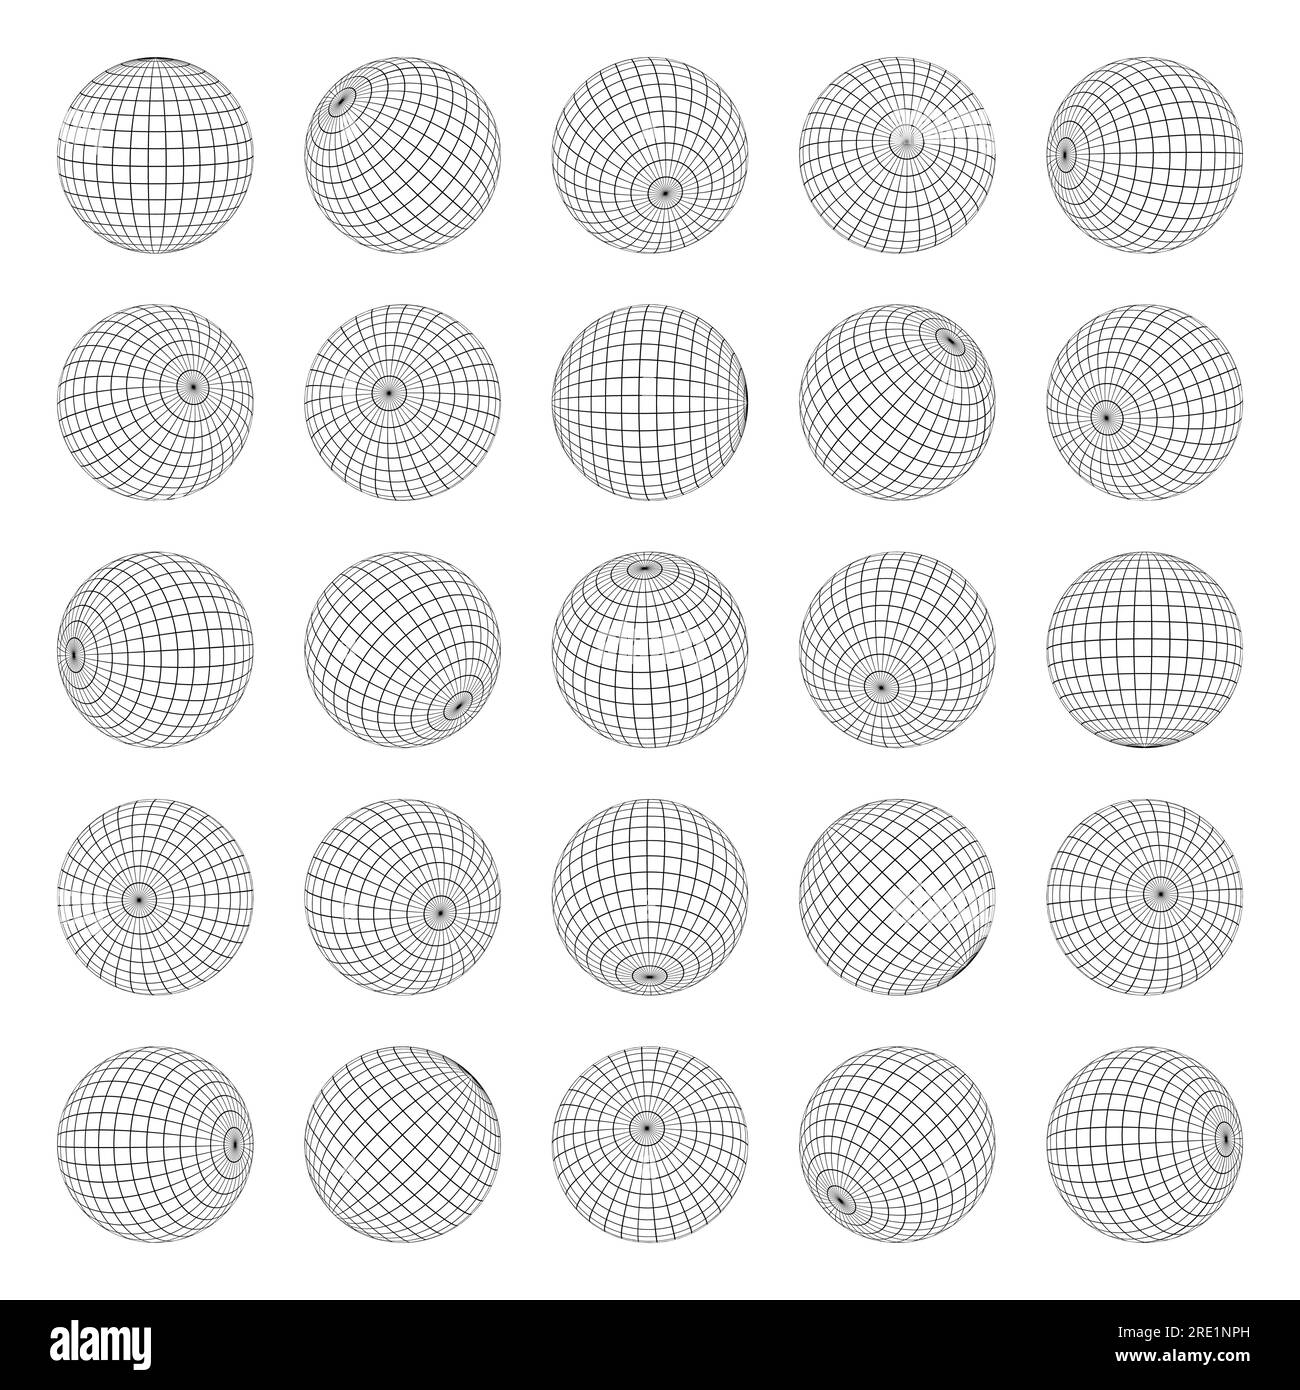 Globe grid spheres. World map topography spheres with latitude and longitude information, world geography linear mesh collection. Vector set. Round shapes in different positions top and side views Stock Vector